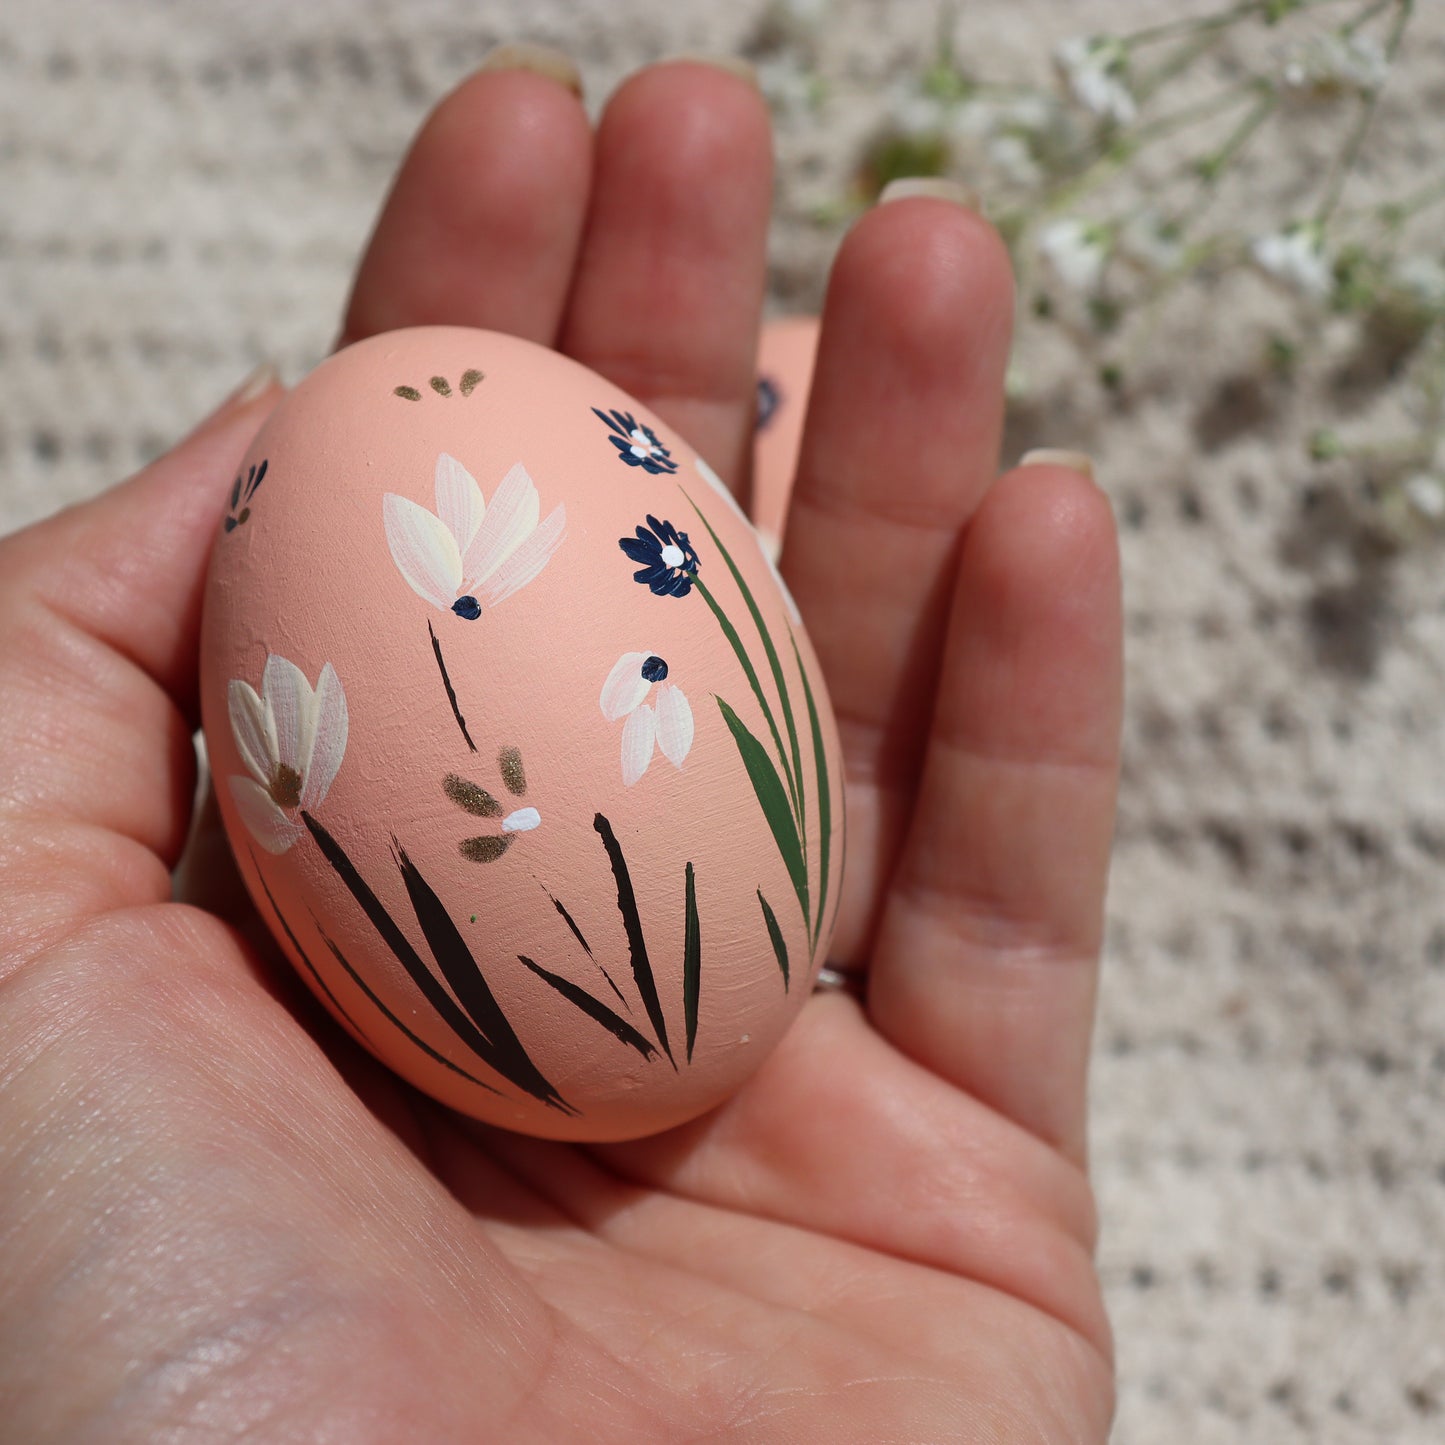 Cosmic Bloom Ceramic and Wooden Easter Egg